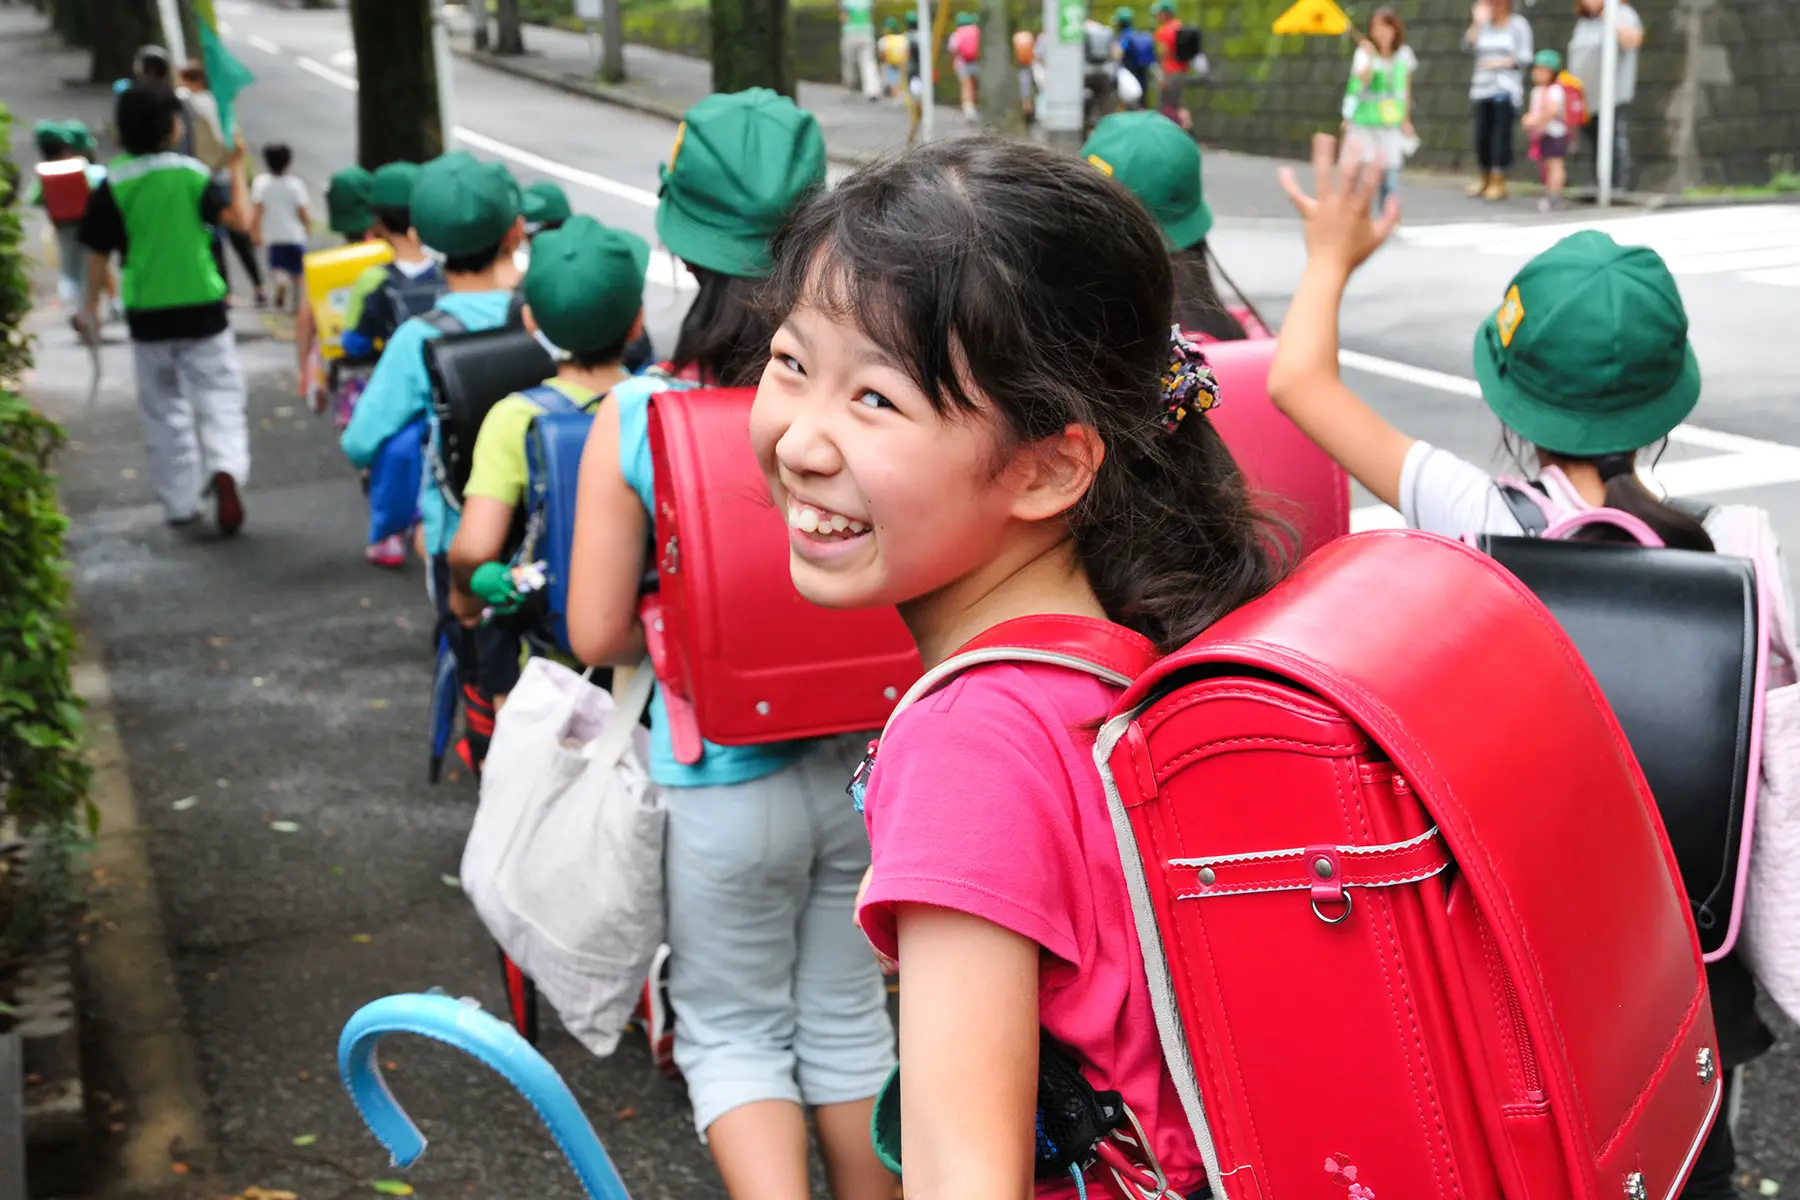 Primary school children with green hats and bright colored backpacks walk away from camera, one little girl looks around and smiles